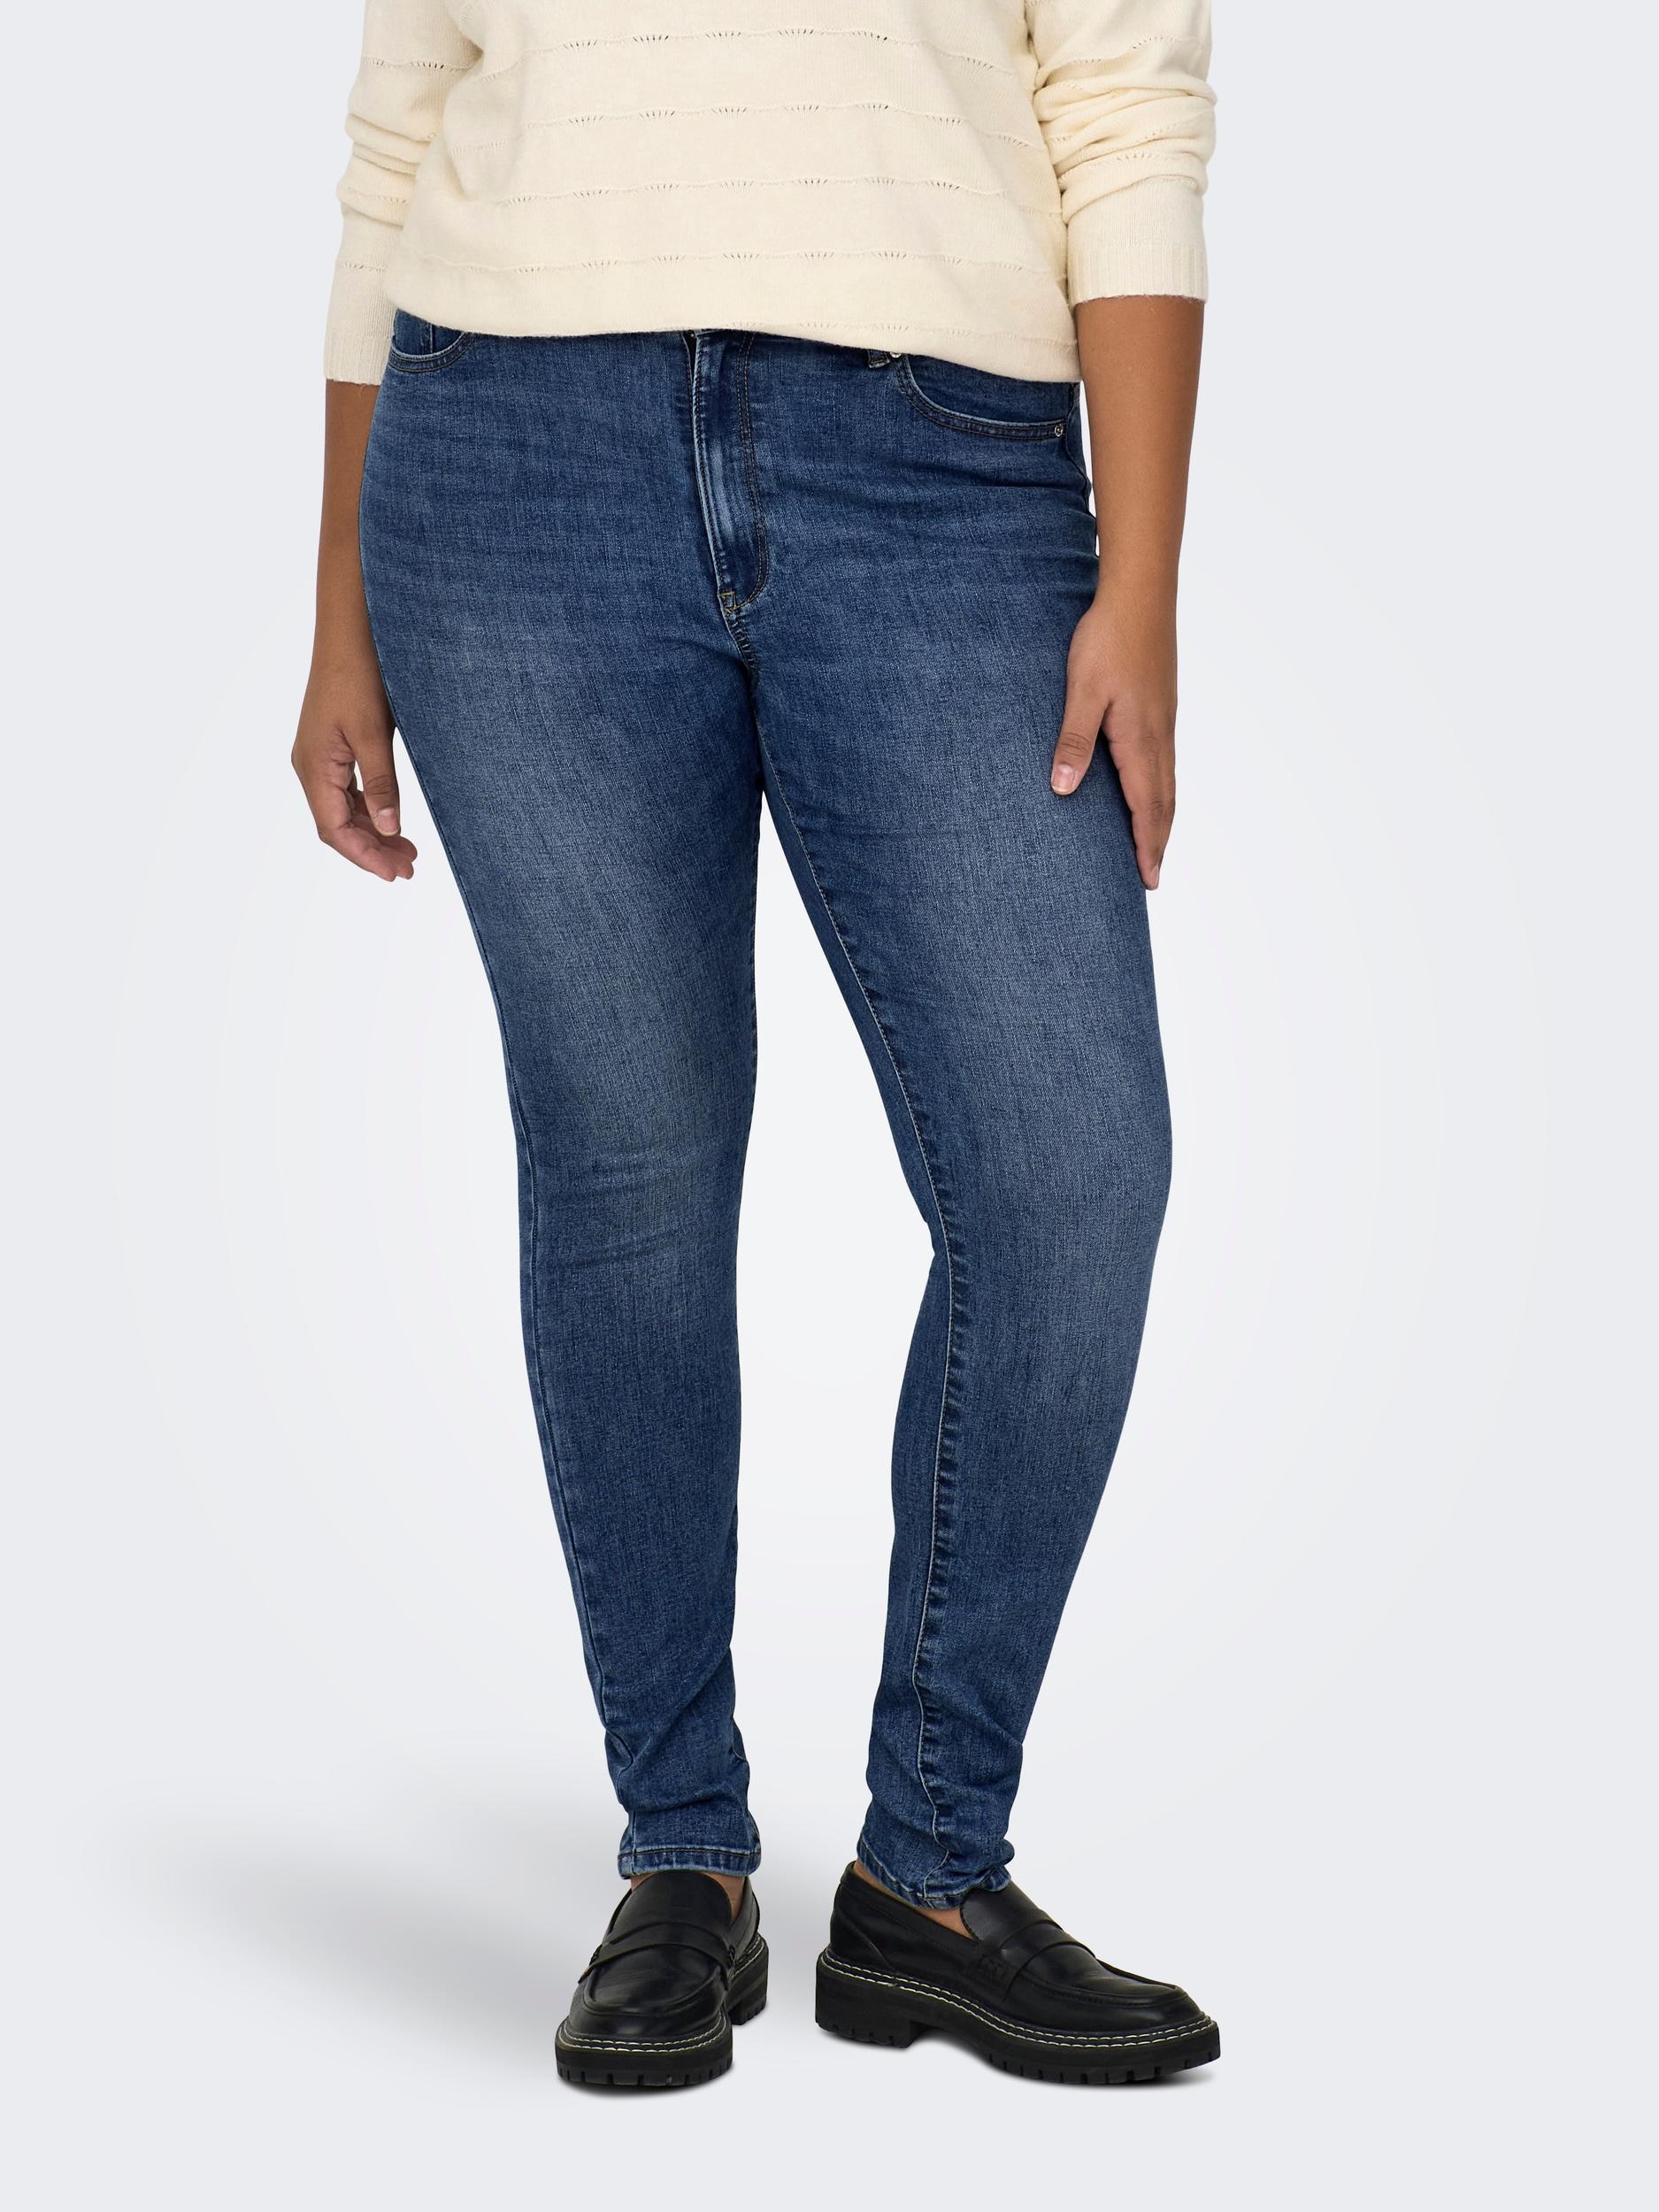 Skinny-fit-Jeans CARMAKOMA kaufen online SKINNY HW | ONLY »CARROSE I\'m BF« DNM GUA939 walking